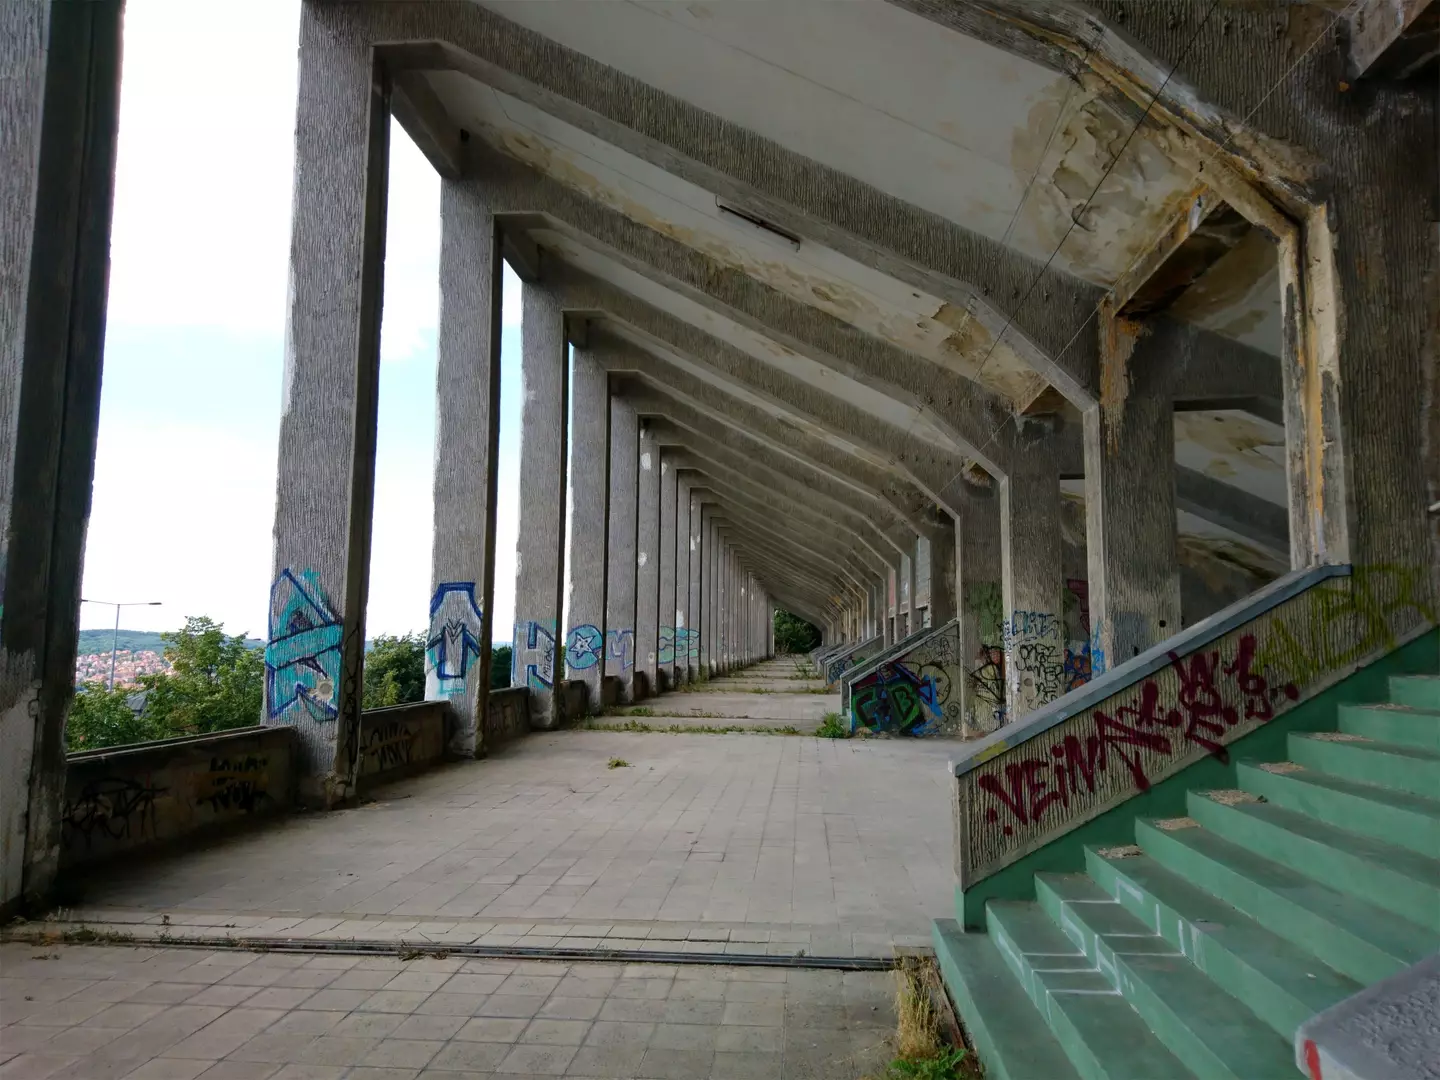 It was once the world's biggest stadium but has been left an abandoned ruin. (